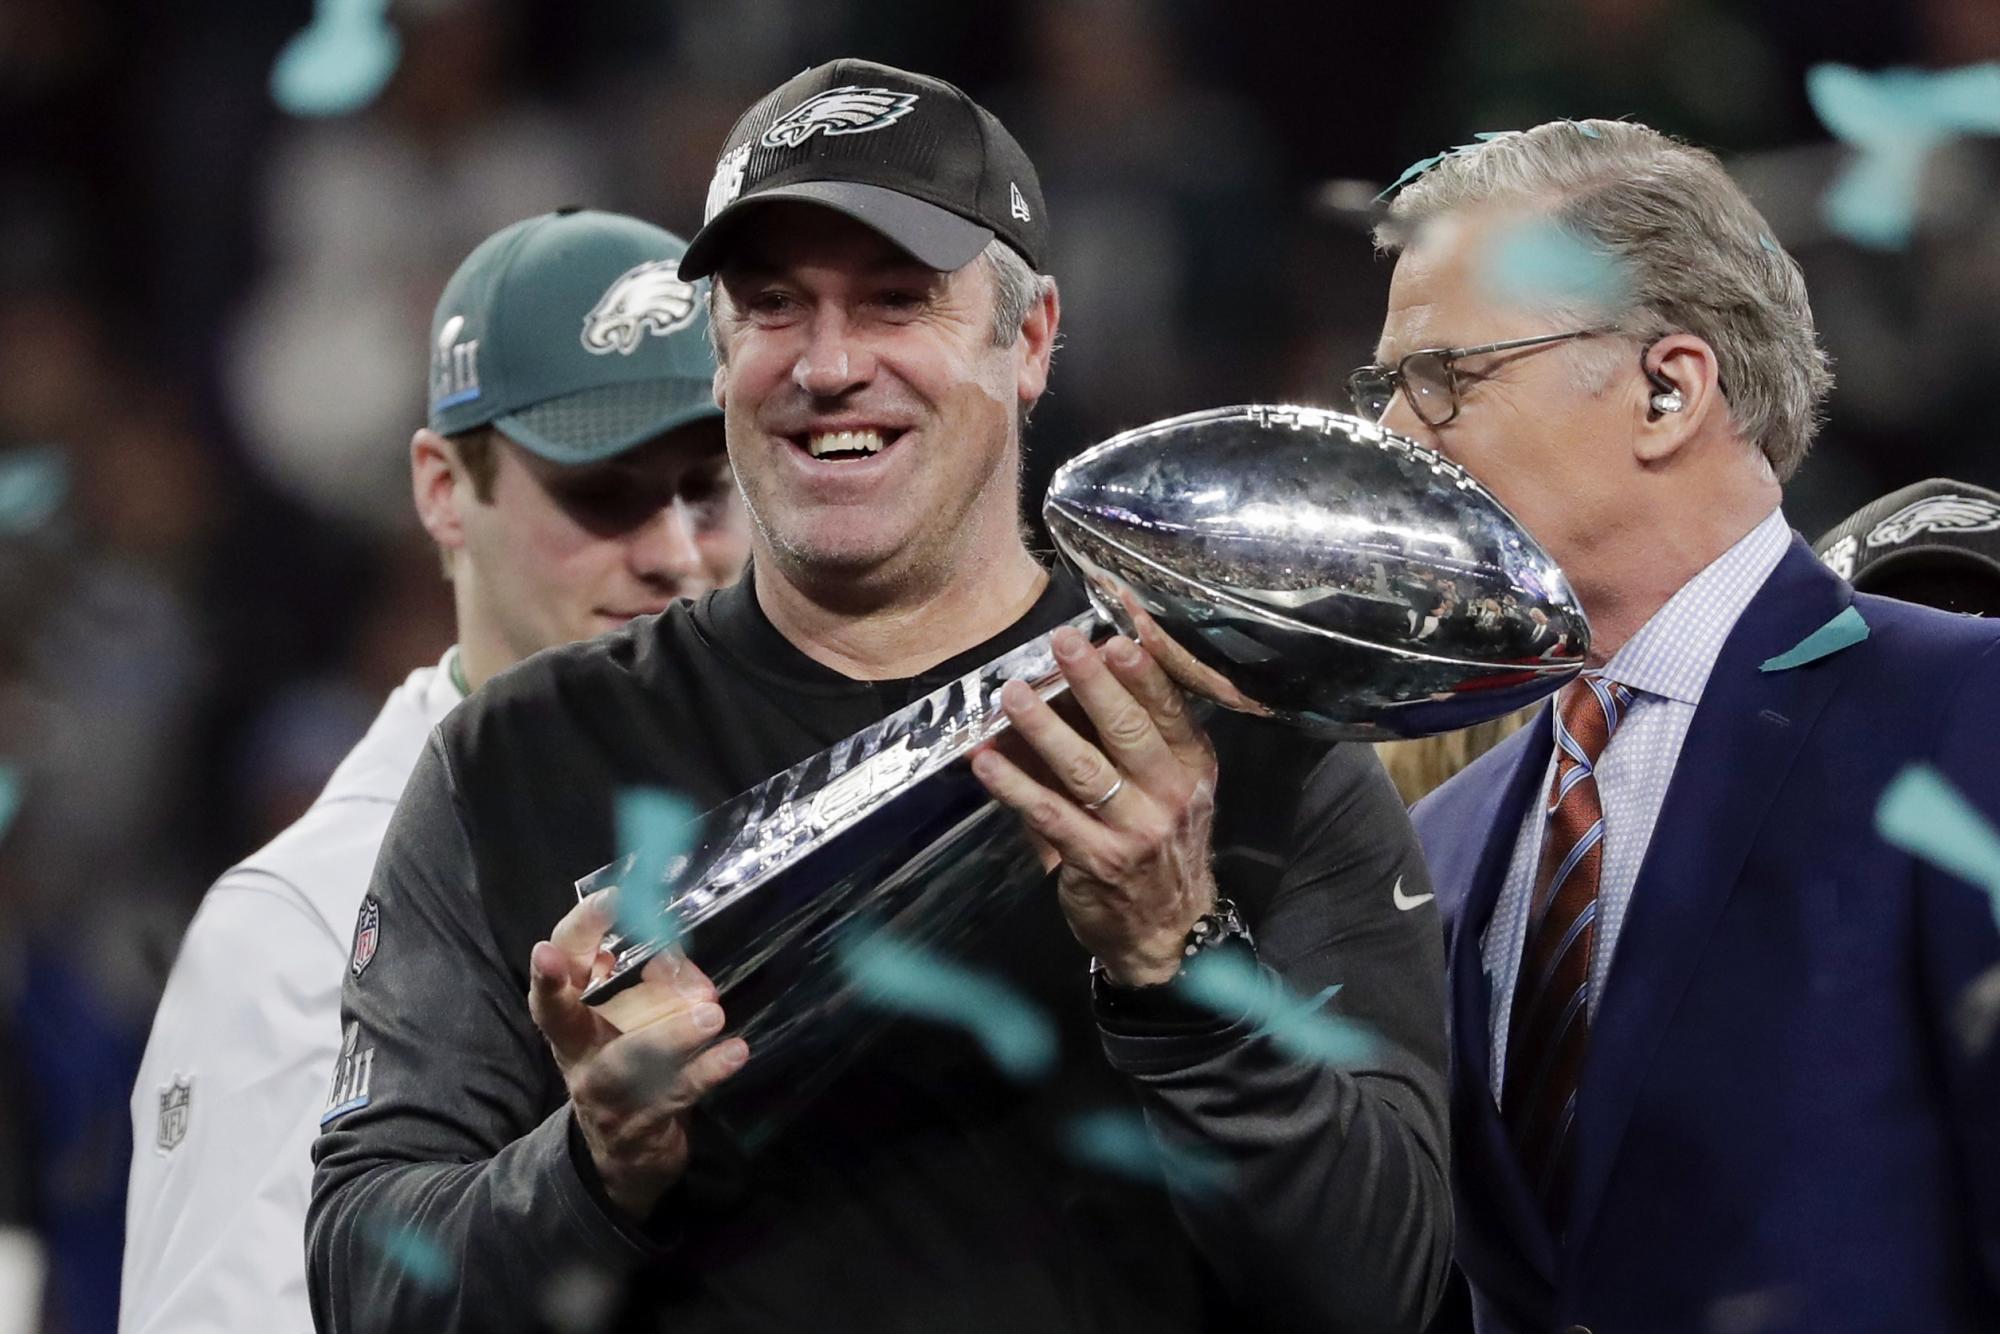 Philadelphia Eagles head coach Doug Pederson holds up the Vincent Lombardi trophy after winning the NFL Super Bowl 52 football game against the New England Patriots, Sunday, Feb. 4, 2018, in Minneapolis. The Eagles won 41-33. 